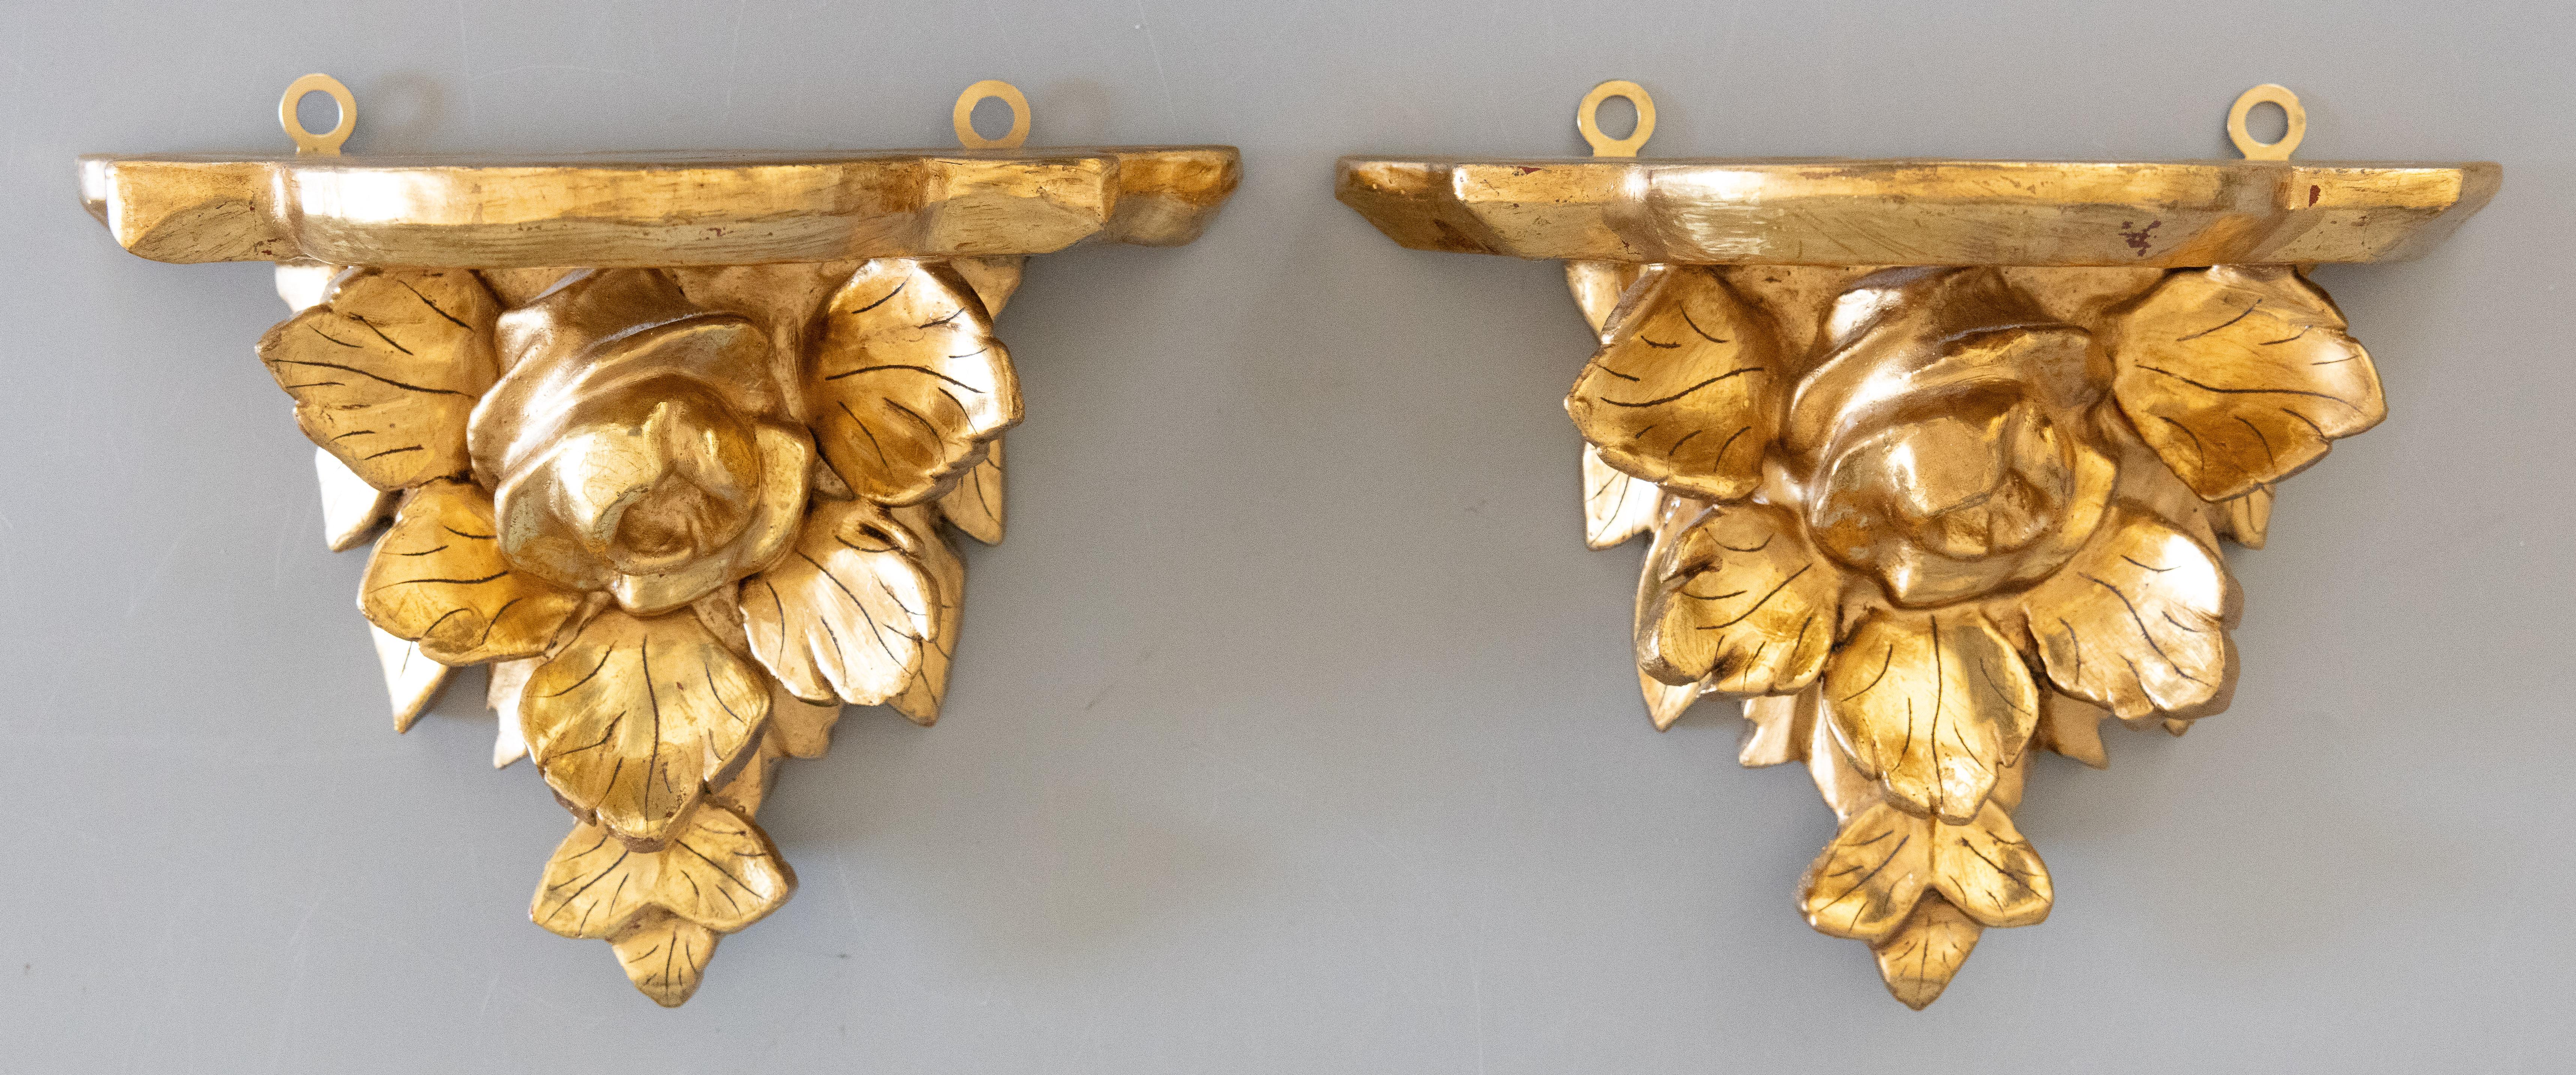 A lovely pair of vintage Italian gilded wood and gesso wall brackets shelves, circa 1940. They are decorated with lovely carved roses in a beautiful gilt patina, perfect for displaying decorative collectibles or fabulous on their